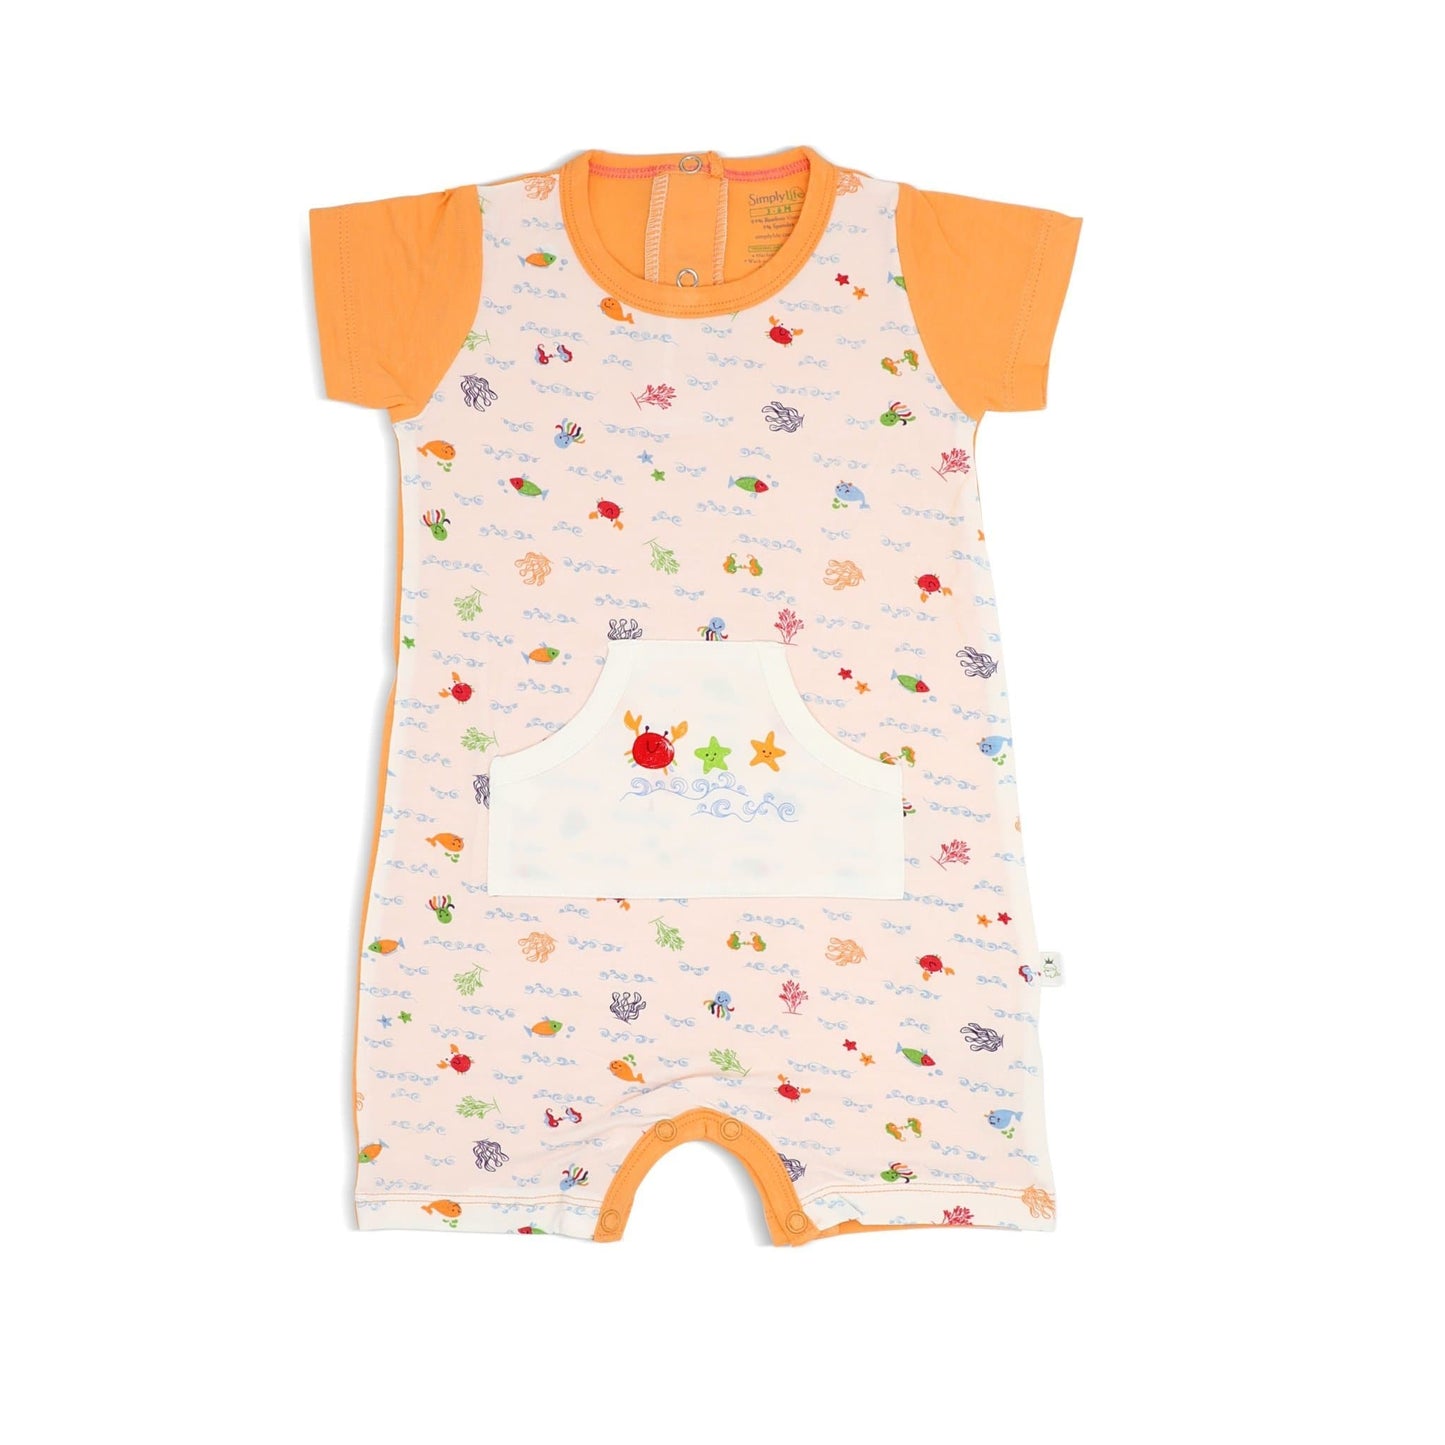 Sea World - Short-sleeved Shortall with Front Pockets by simplylifebaby